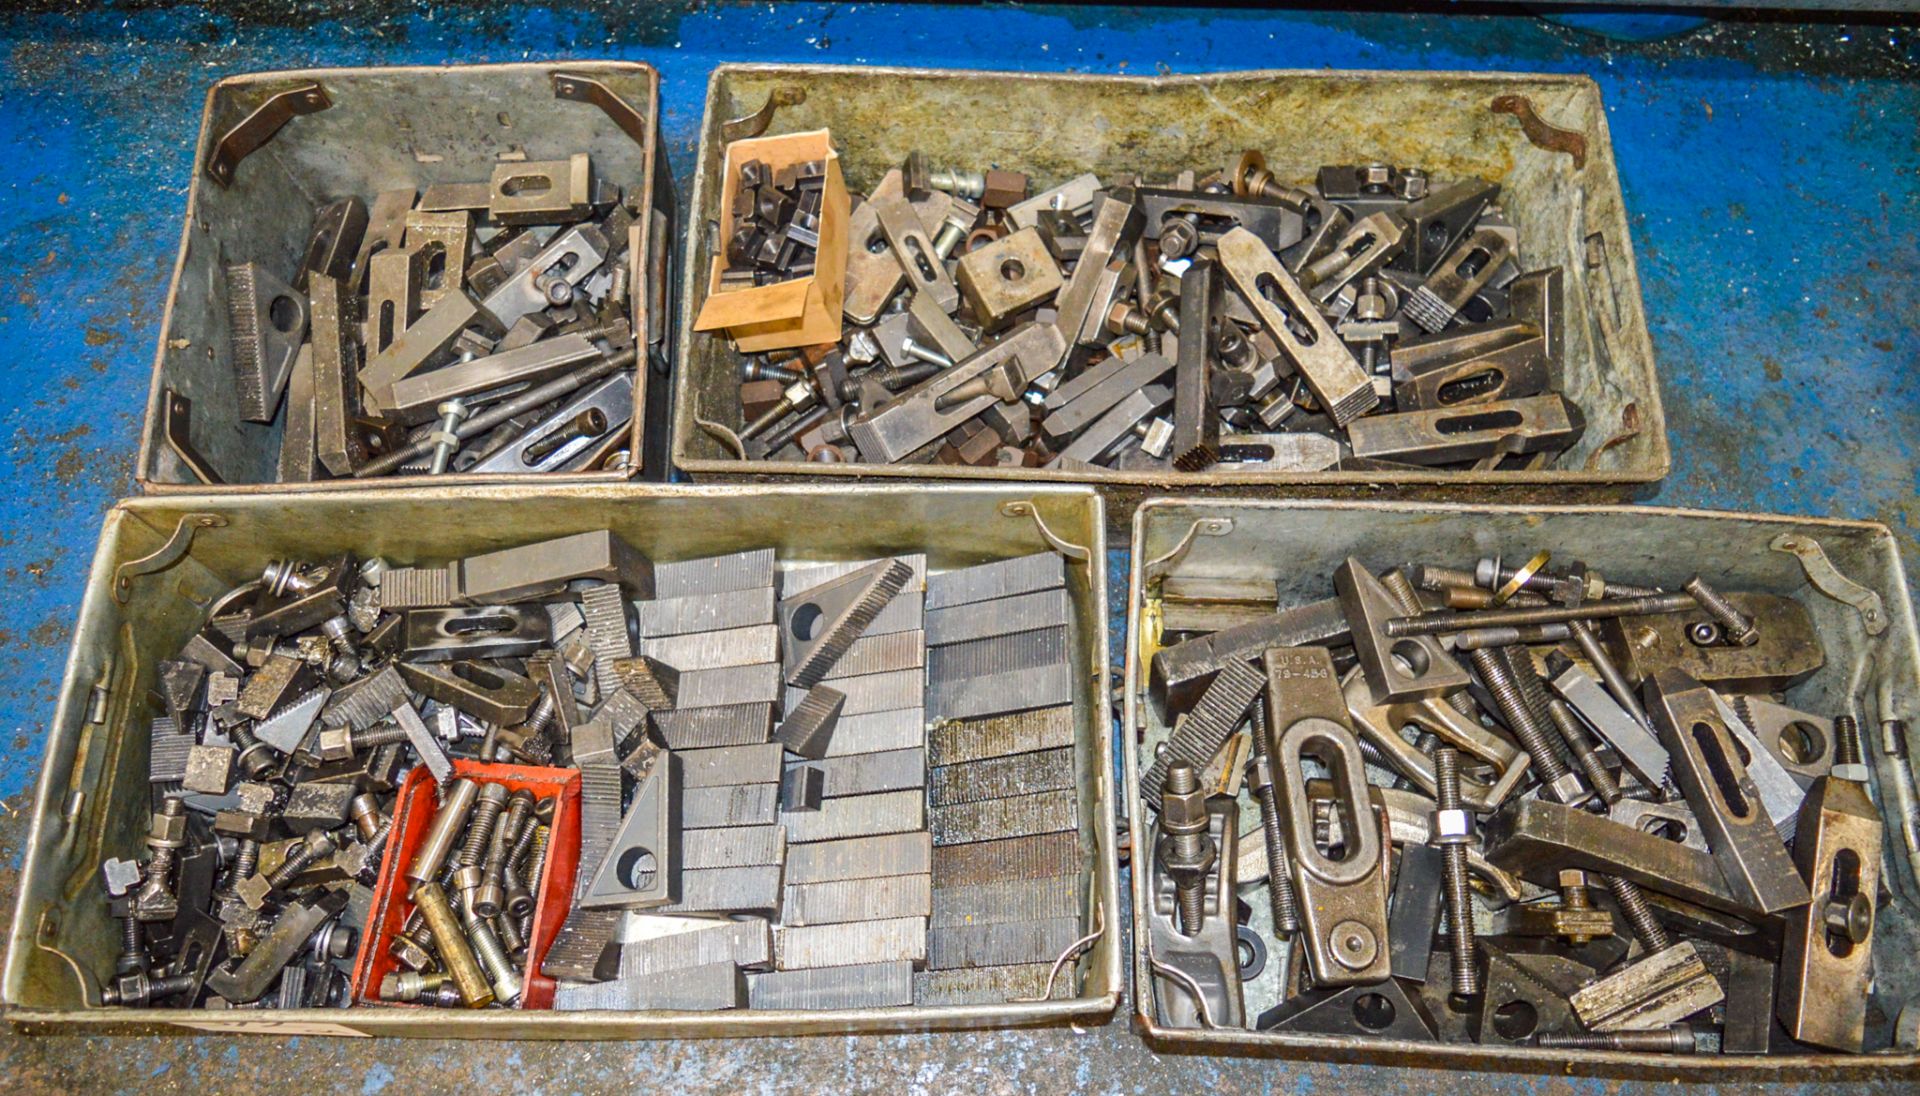 Quantity of clamping components as photographed